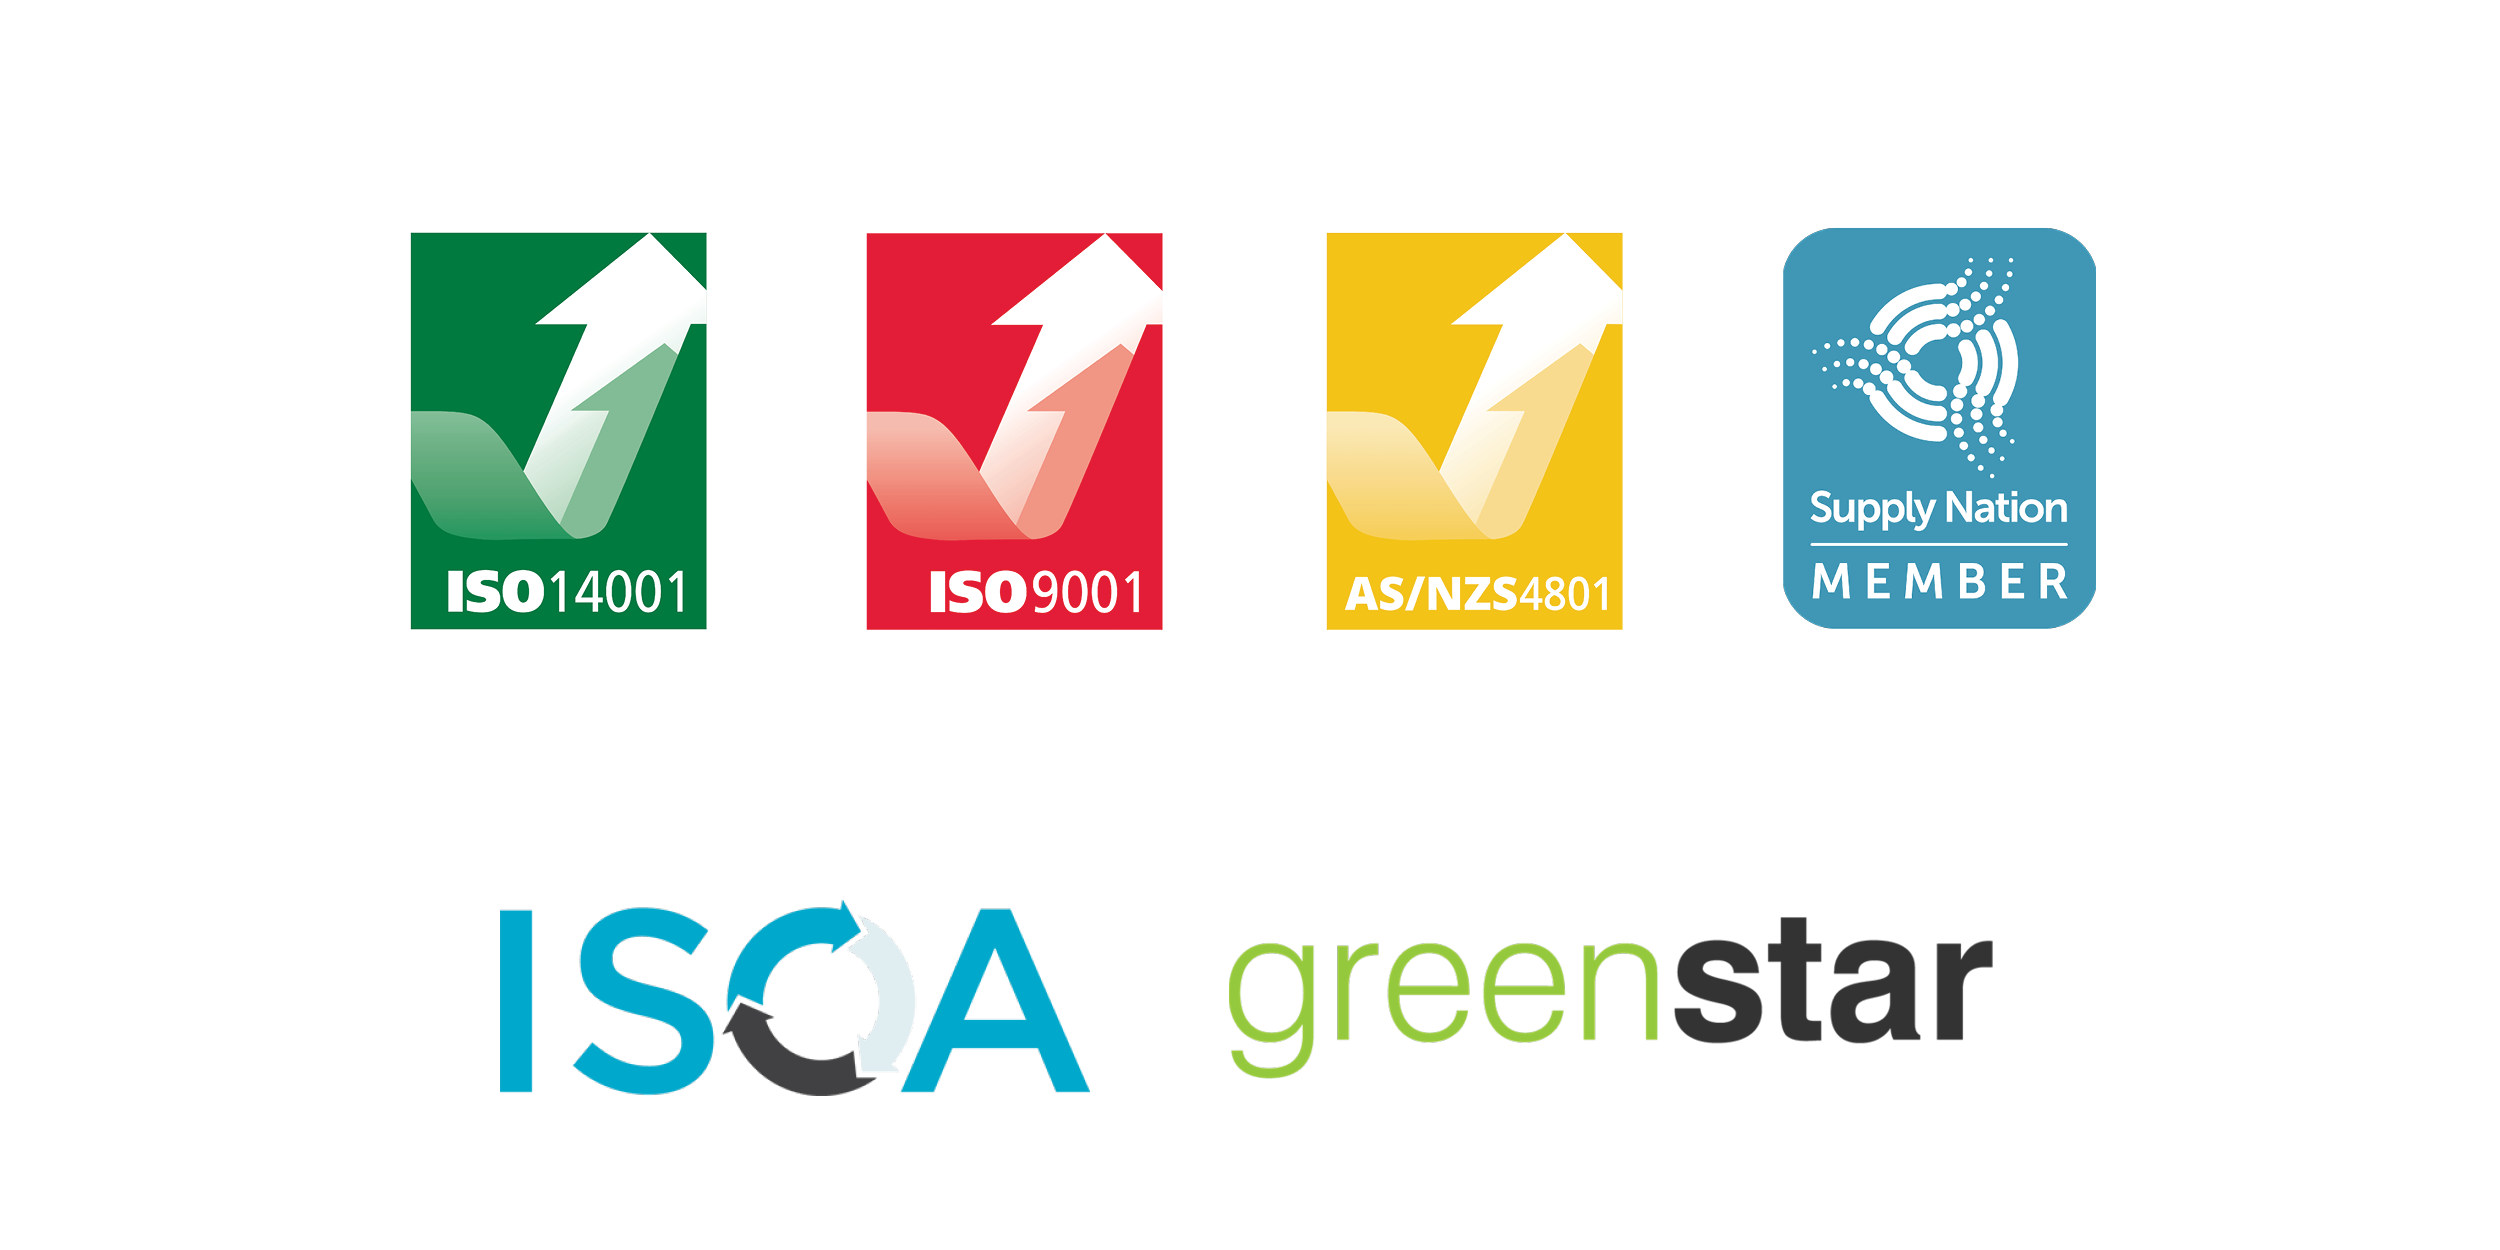 Grasshopper Environmental is awarded with several certifications in best practice in sustainability & waste management including; IS0 14001, ISO 9001, AS/NZS 4801, Supply Nation and ISCA Membership and Green Star Accreditation. 